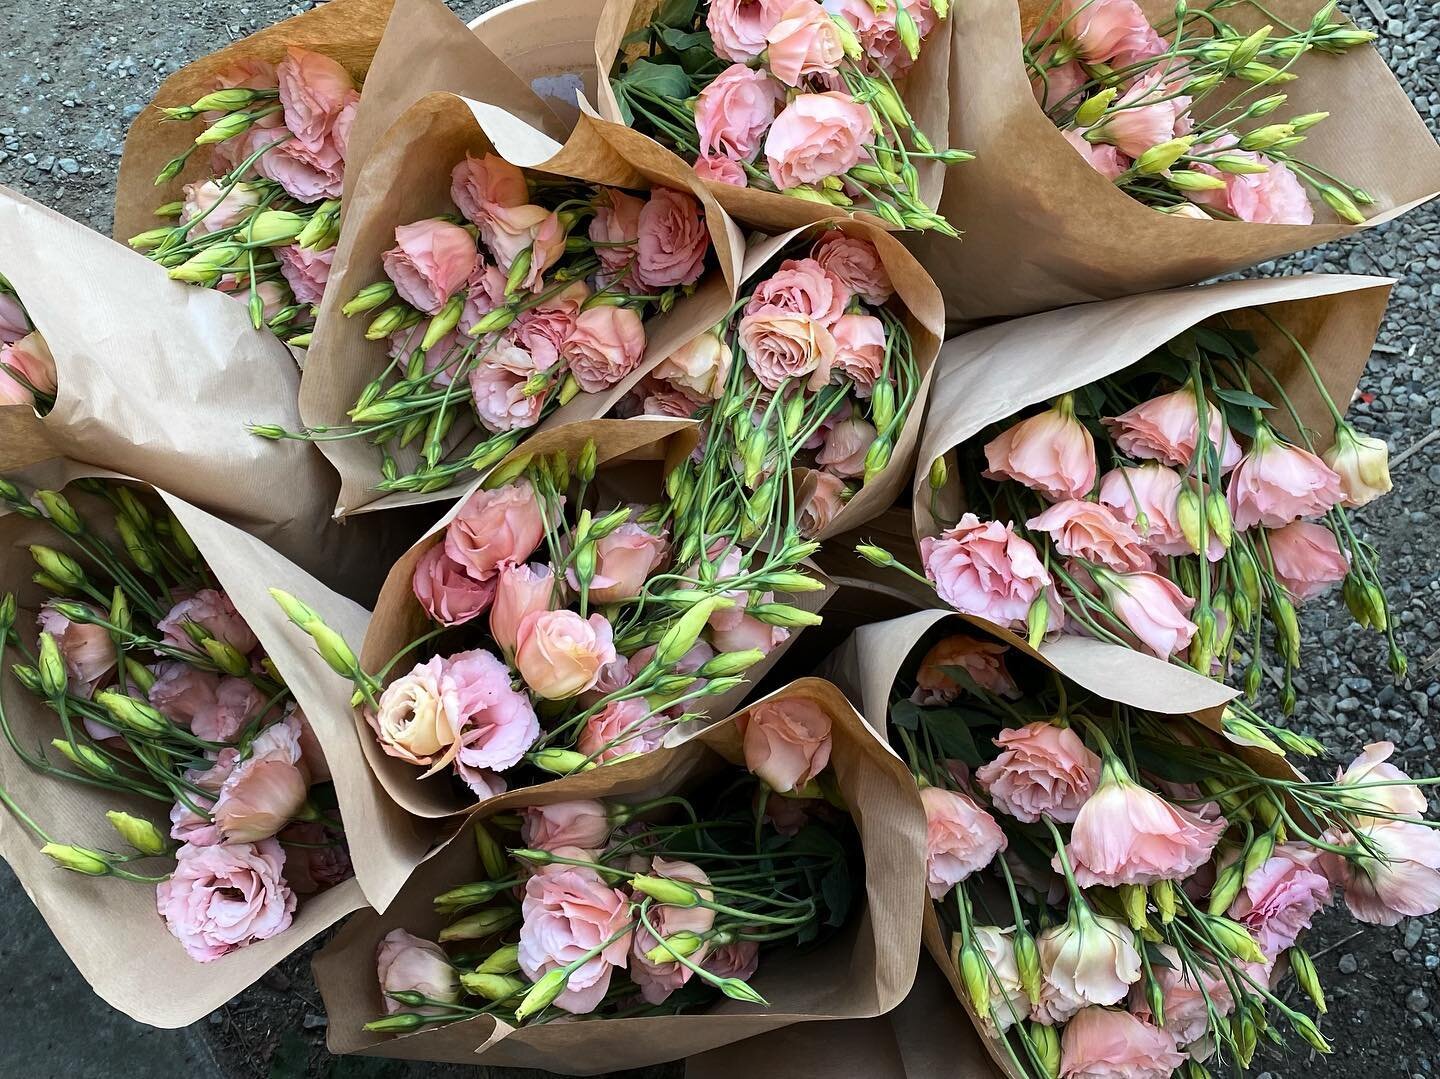 Stellar apricot lisianthus grown by Carla and available @ufgca auction this Tuesday.  It might be the prettiest thing we have shipped this year, which is why it&rsquo;s getting a permanent spot on the feed.  A couple more weeks of wholesale flowers a